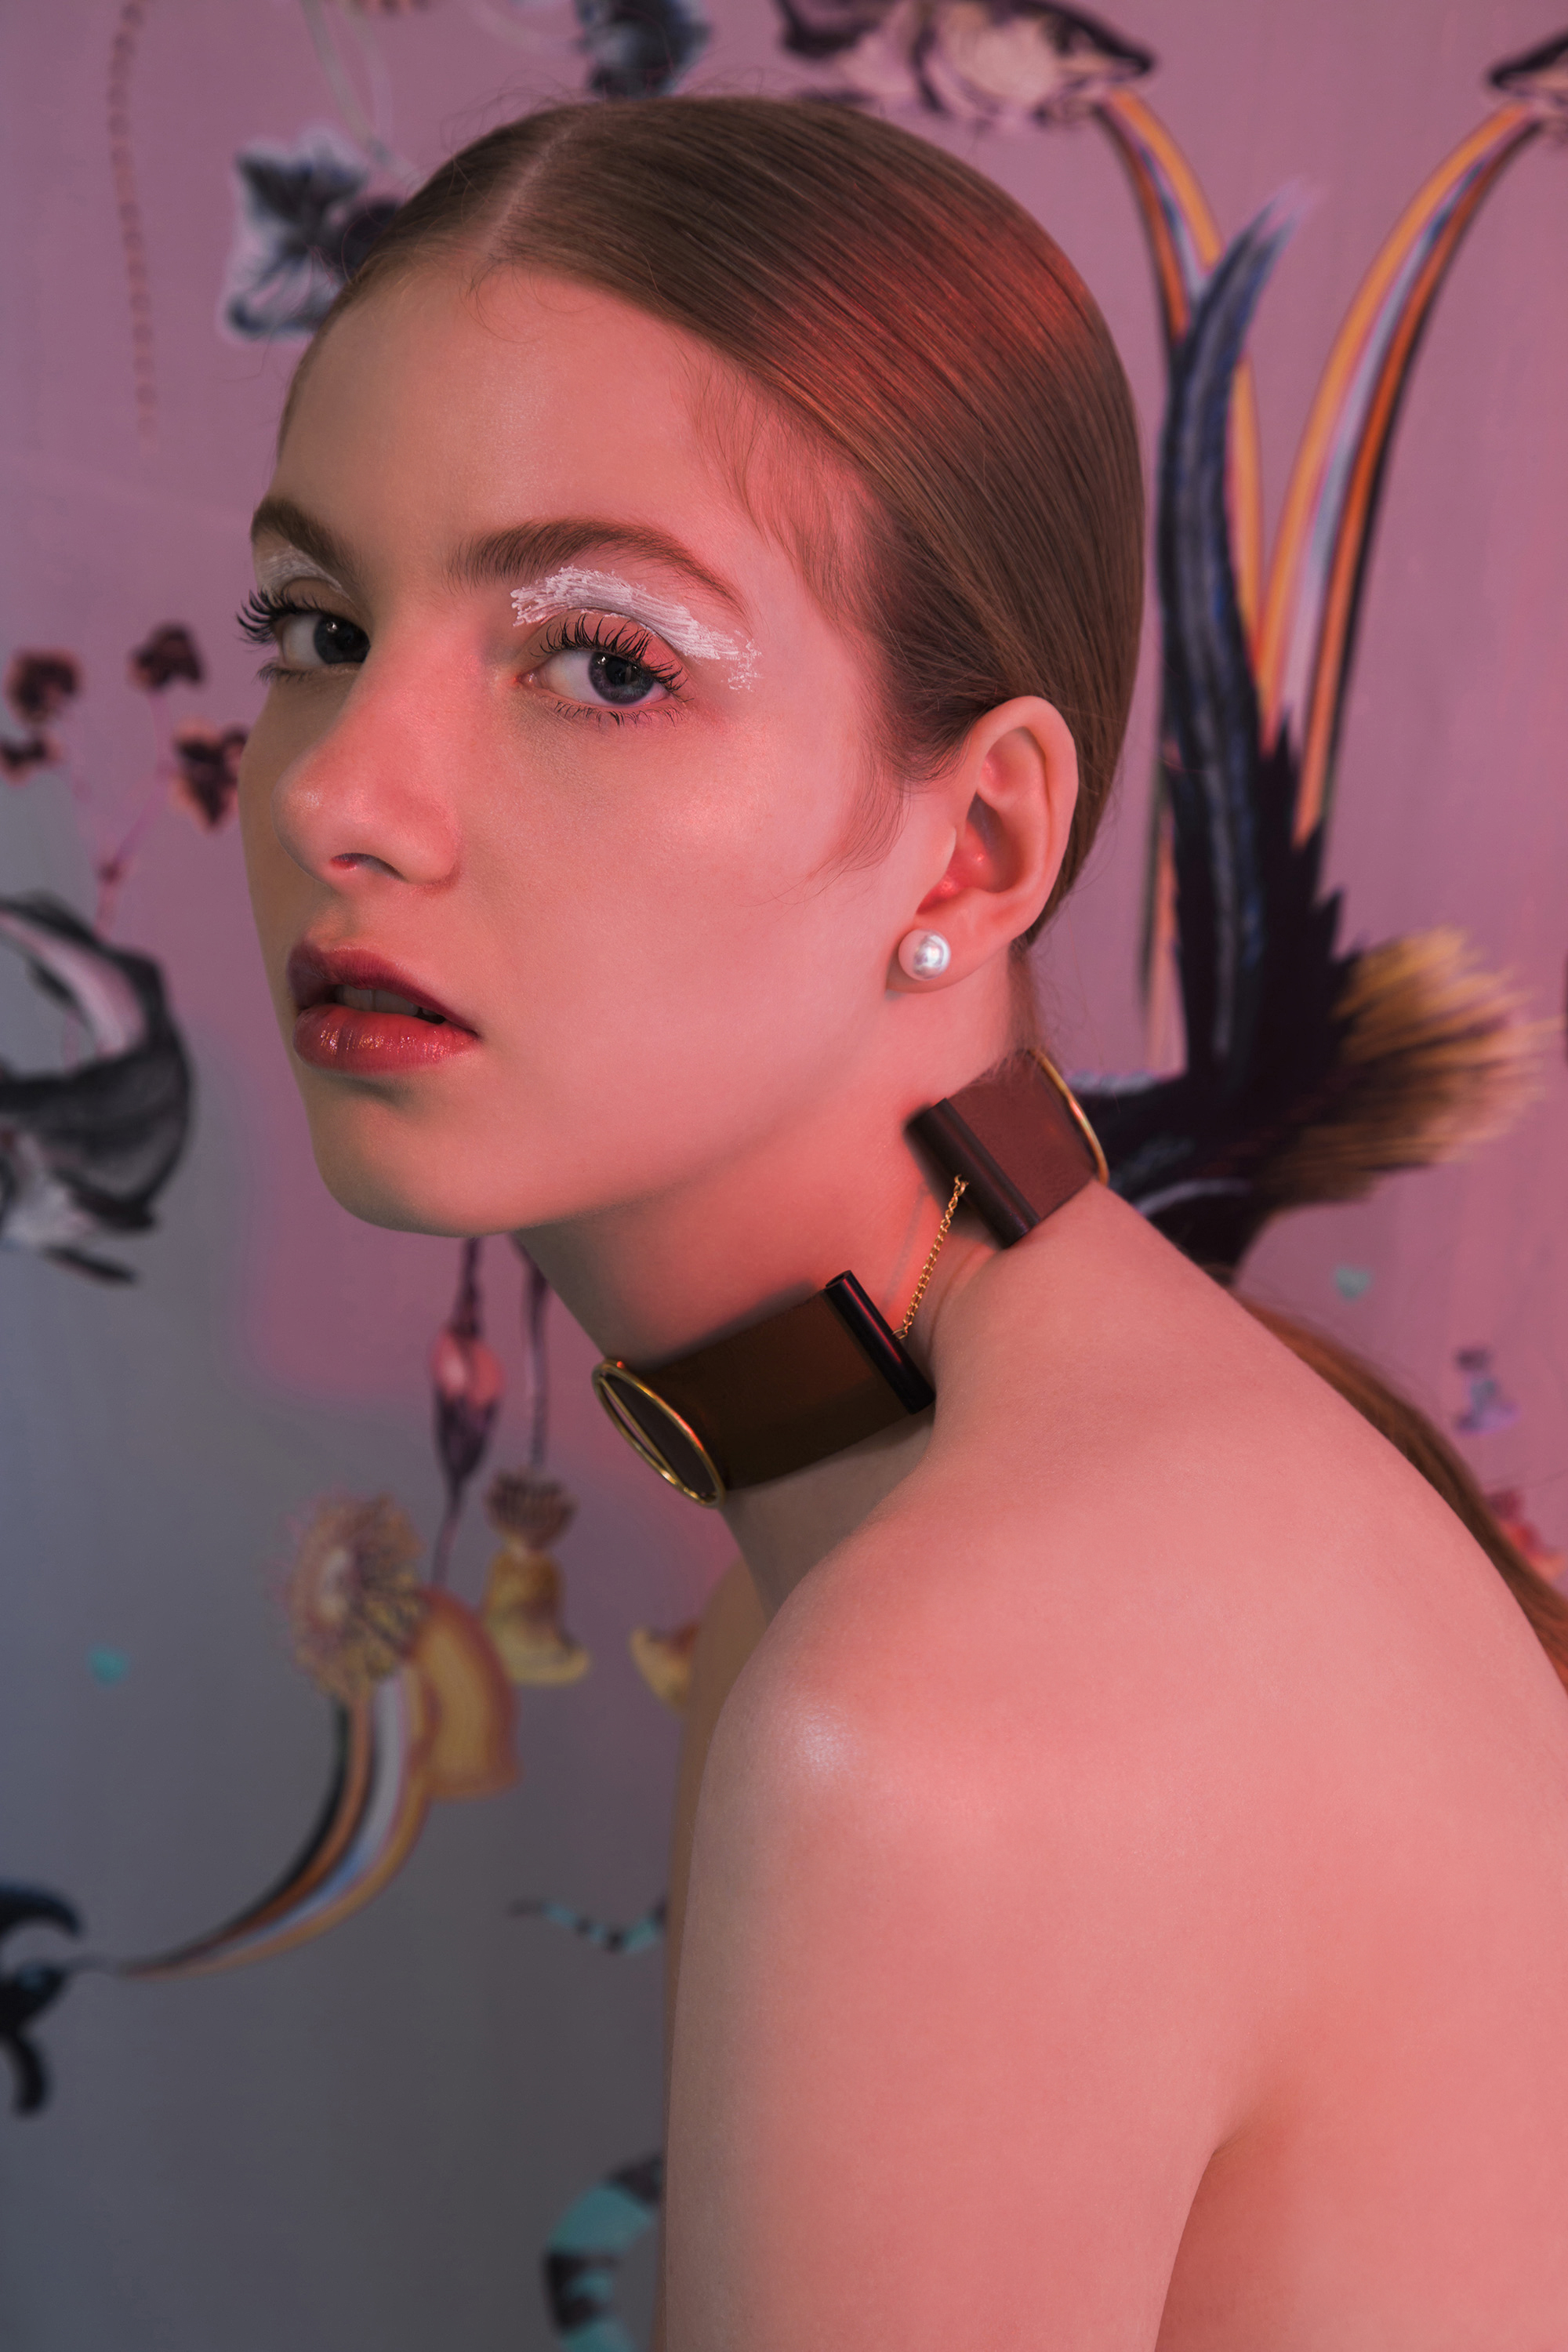 Beauty Archive. Editorial. Photography David PD Hyde. Hair by Cayla Kim 